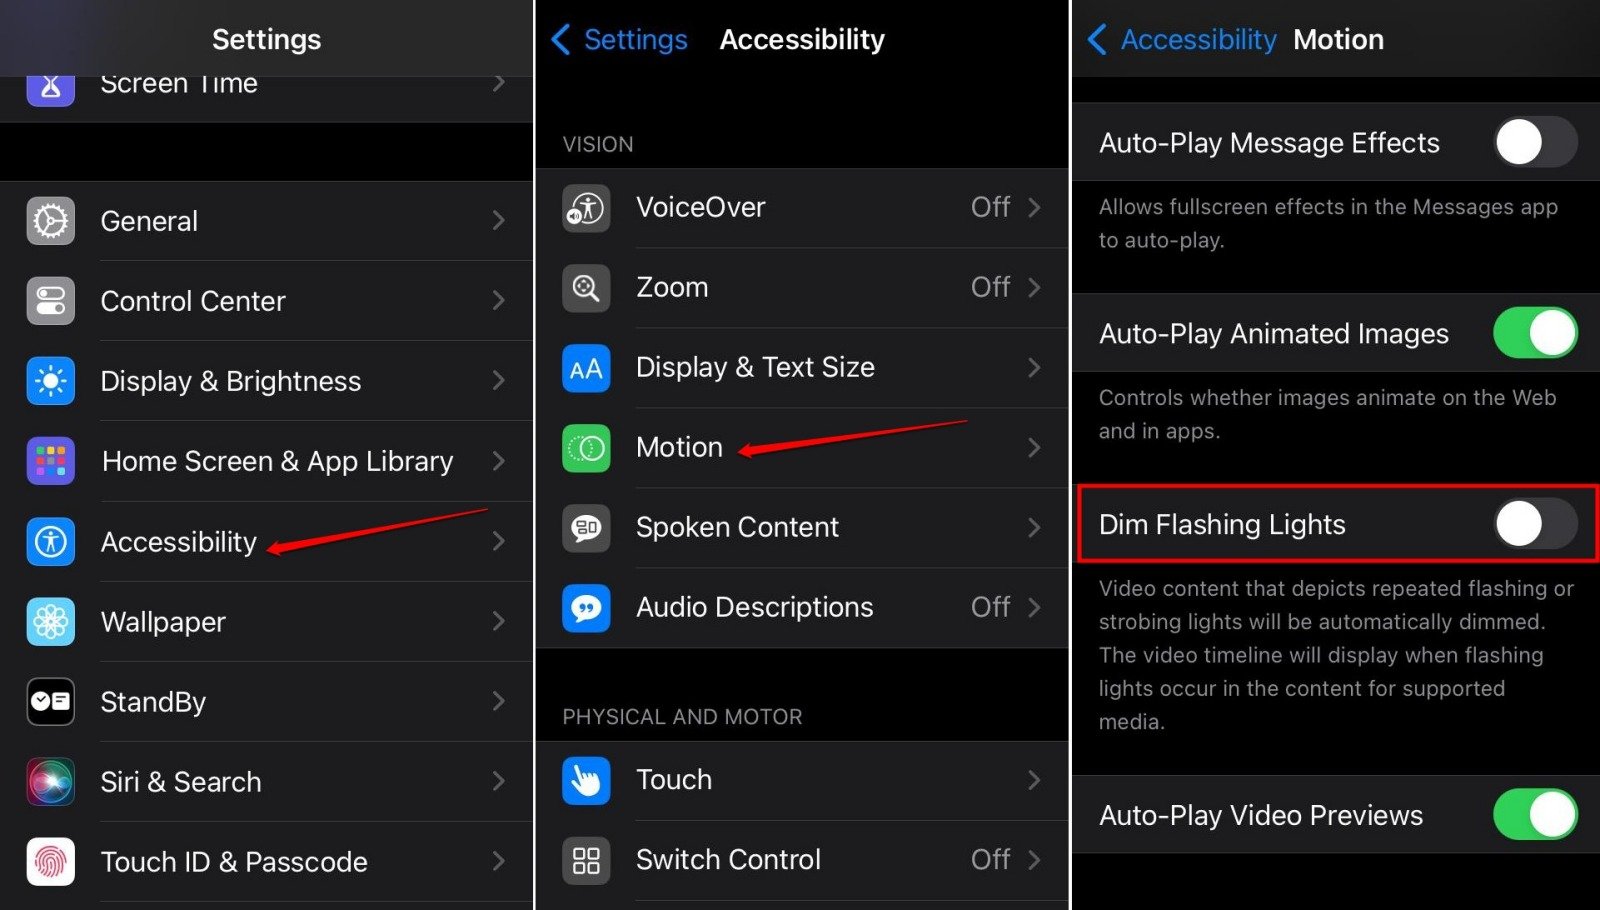 disable the Dim flashing lights feature on iOS